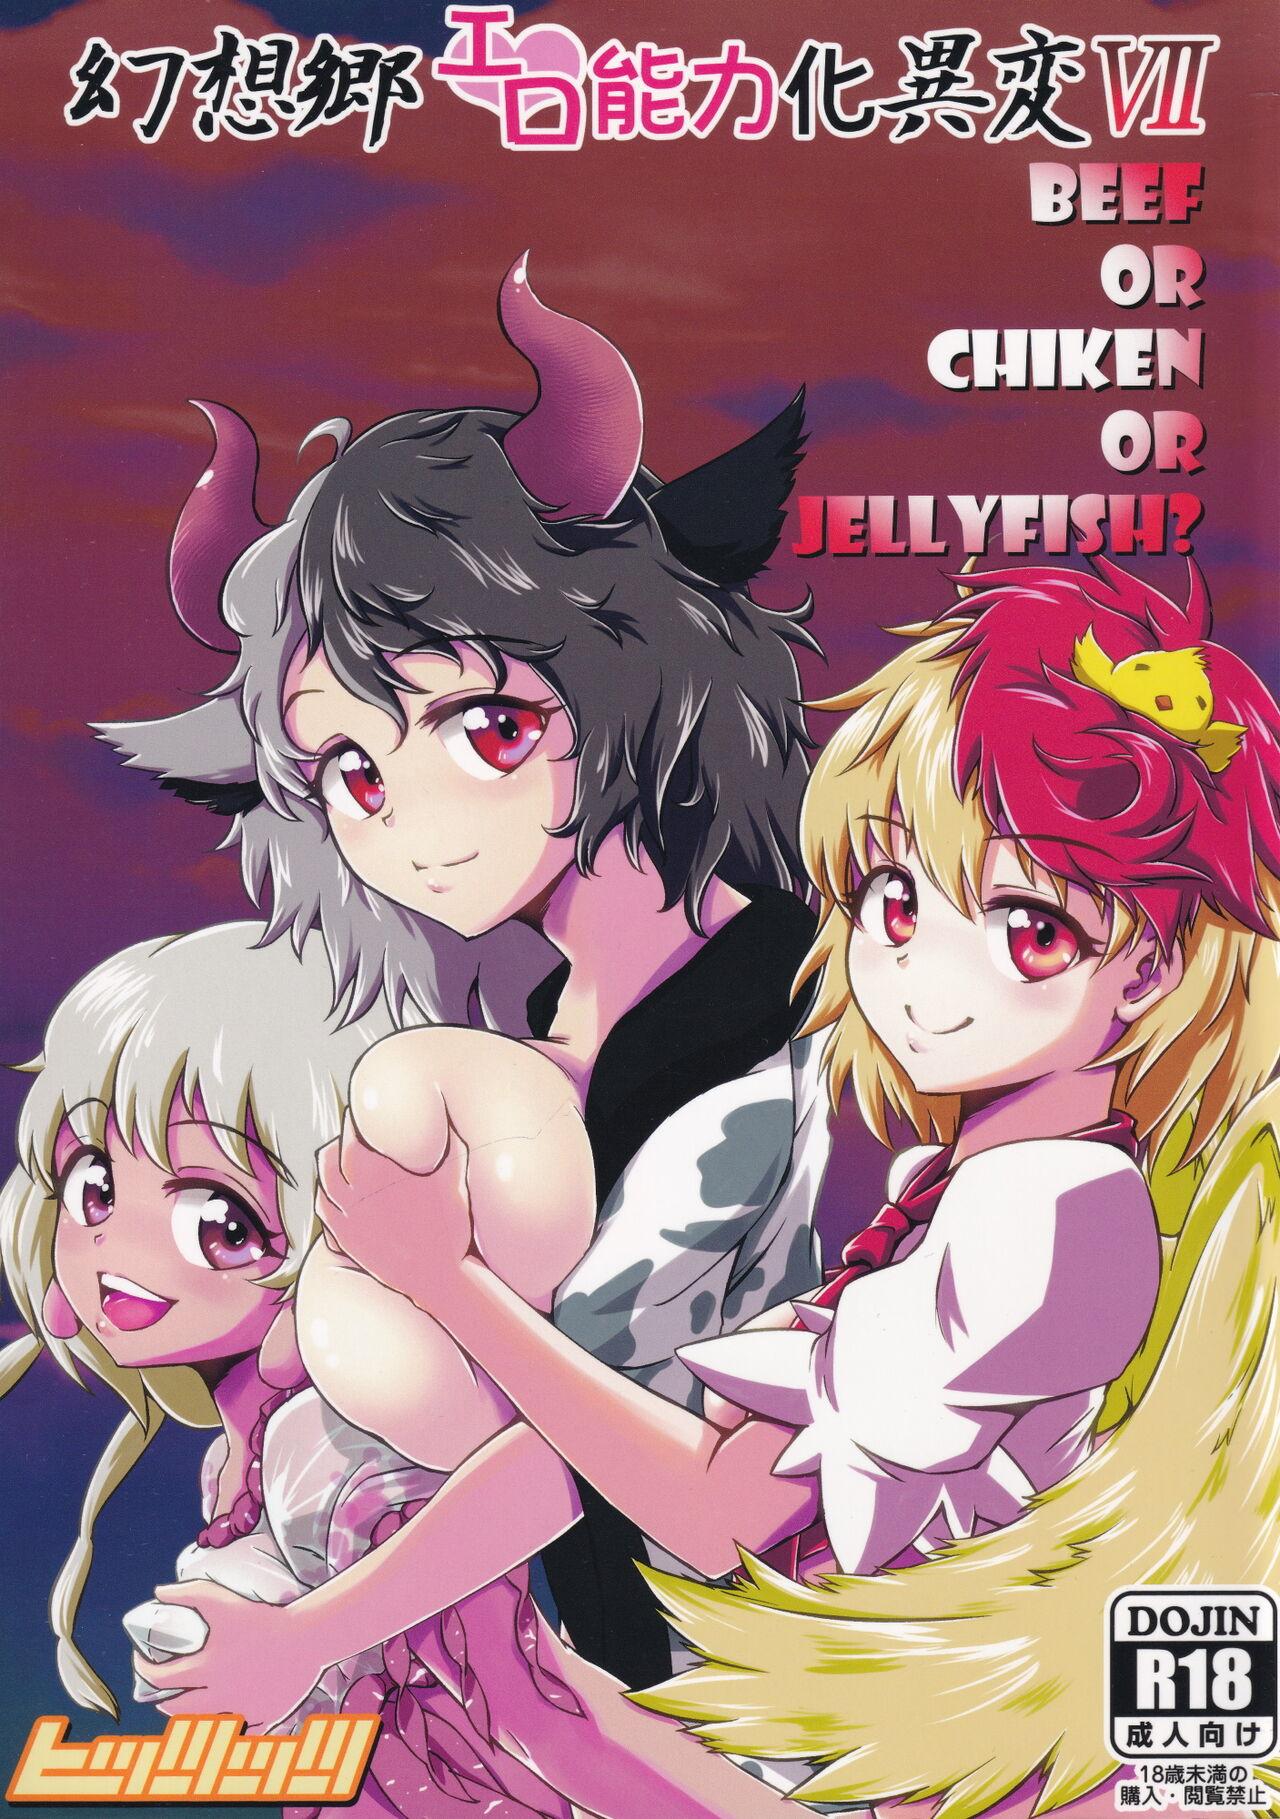 Teen Gensoukyou Ero Nouryoku-ka Ihen VII Beef or Chicken or Jellyfish? - Touhou project Shaven - Picture 1